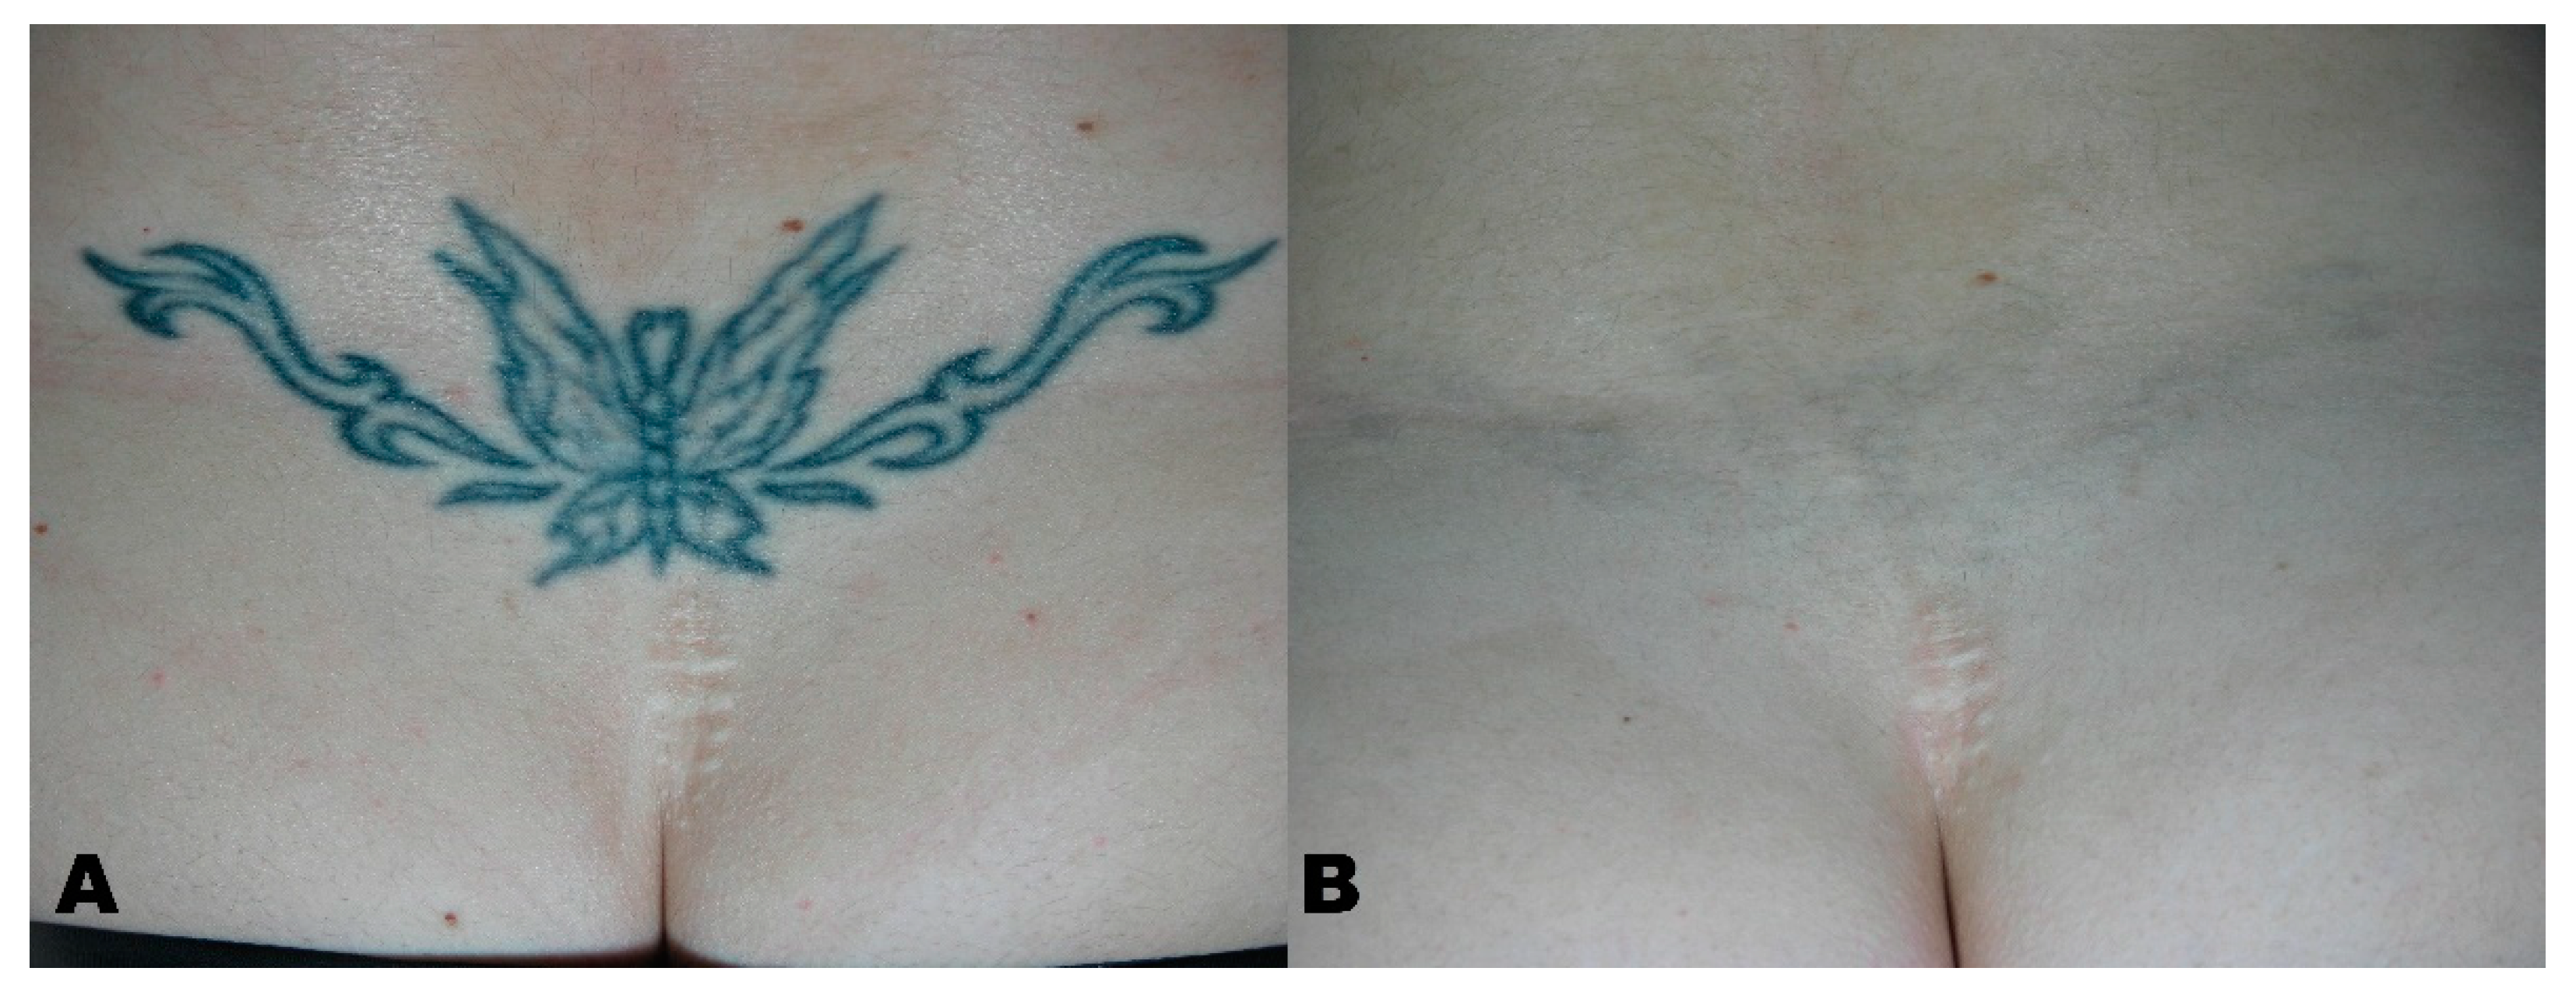 Classic Tattoo Removal vs. FracTatt Tattoo Removal. What to Know.